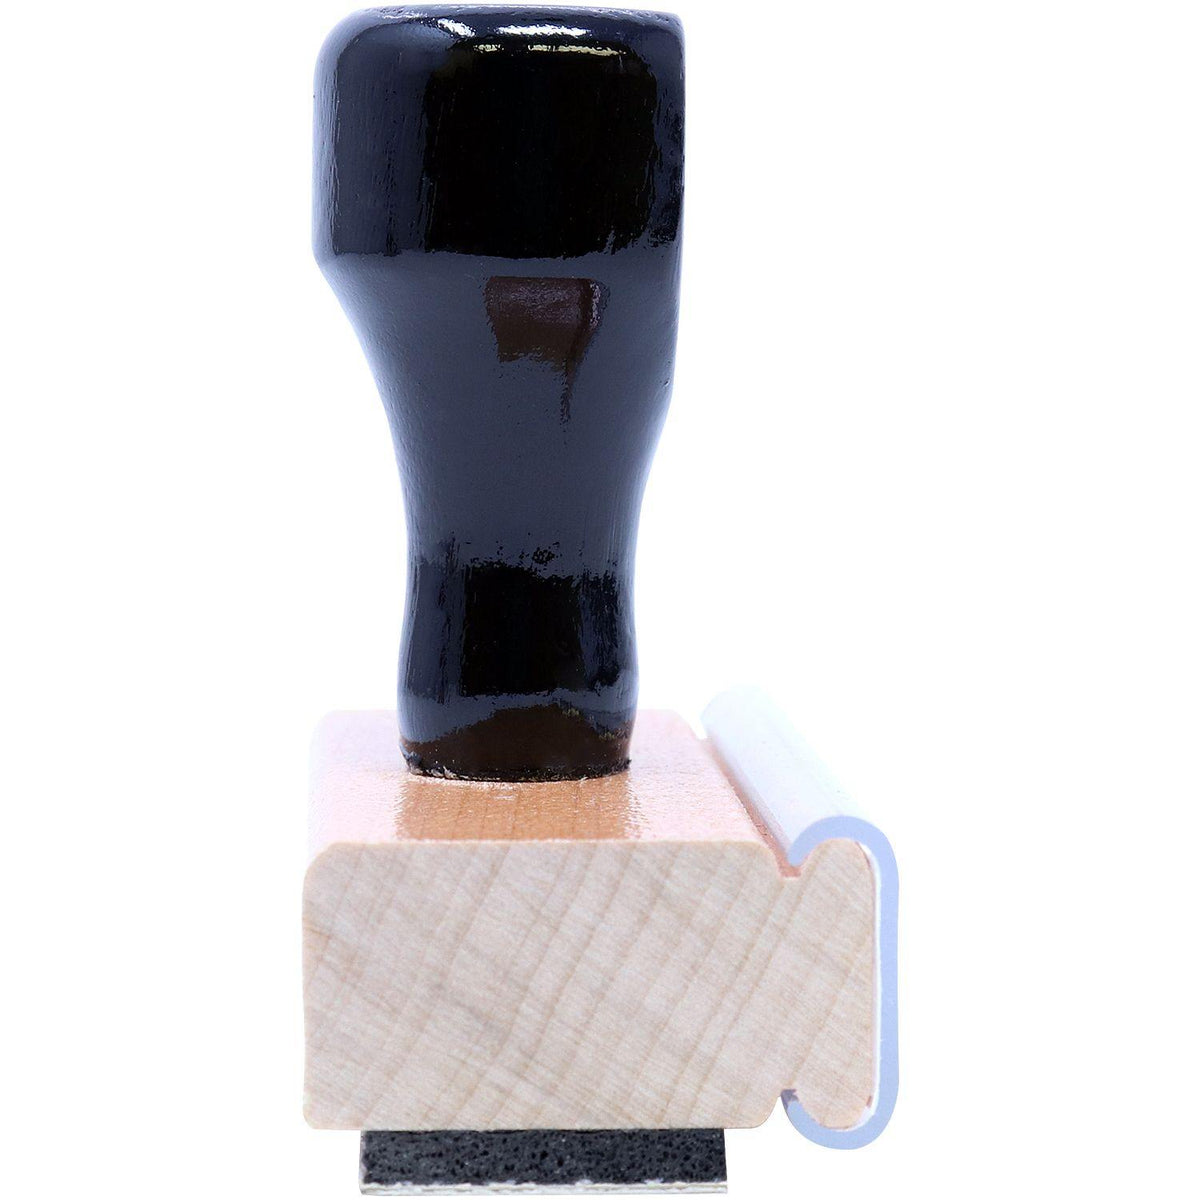 Side View of Large Expert Witness Rubber Stamp